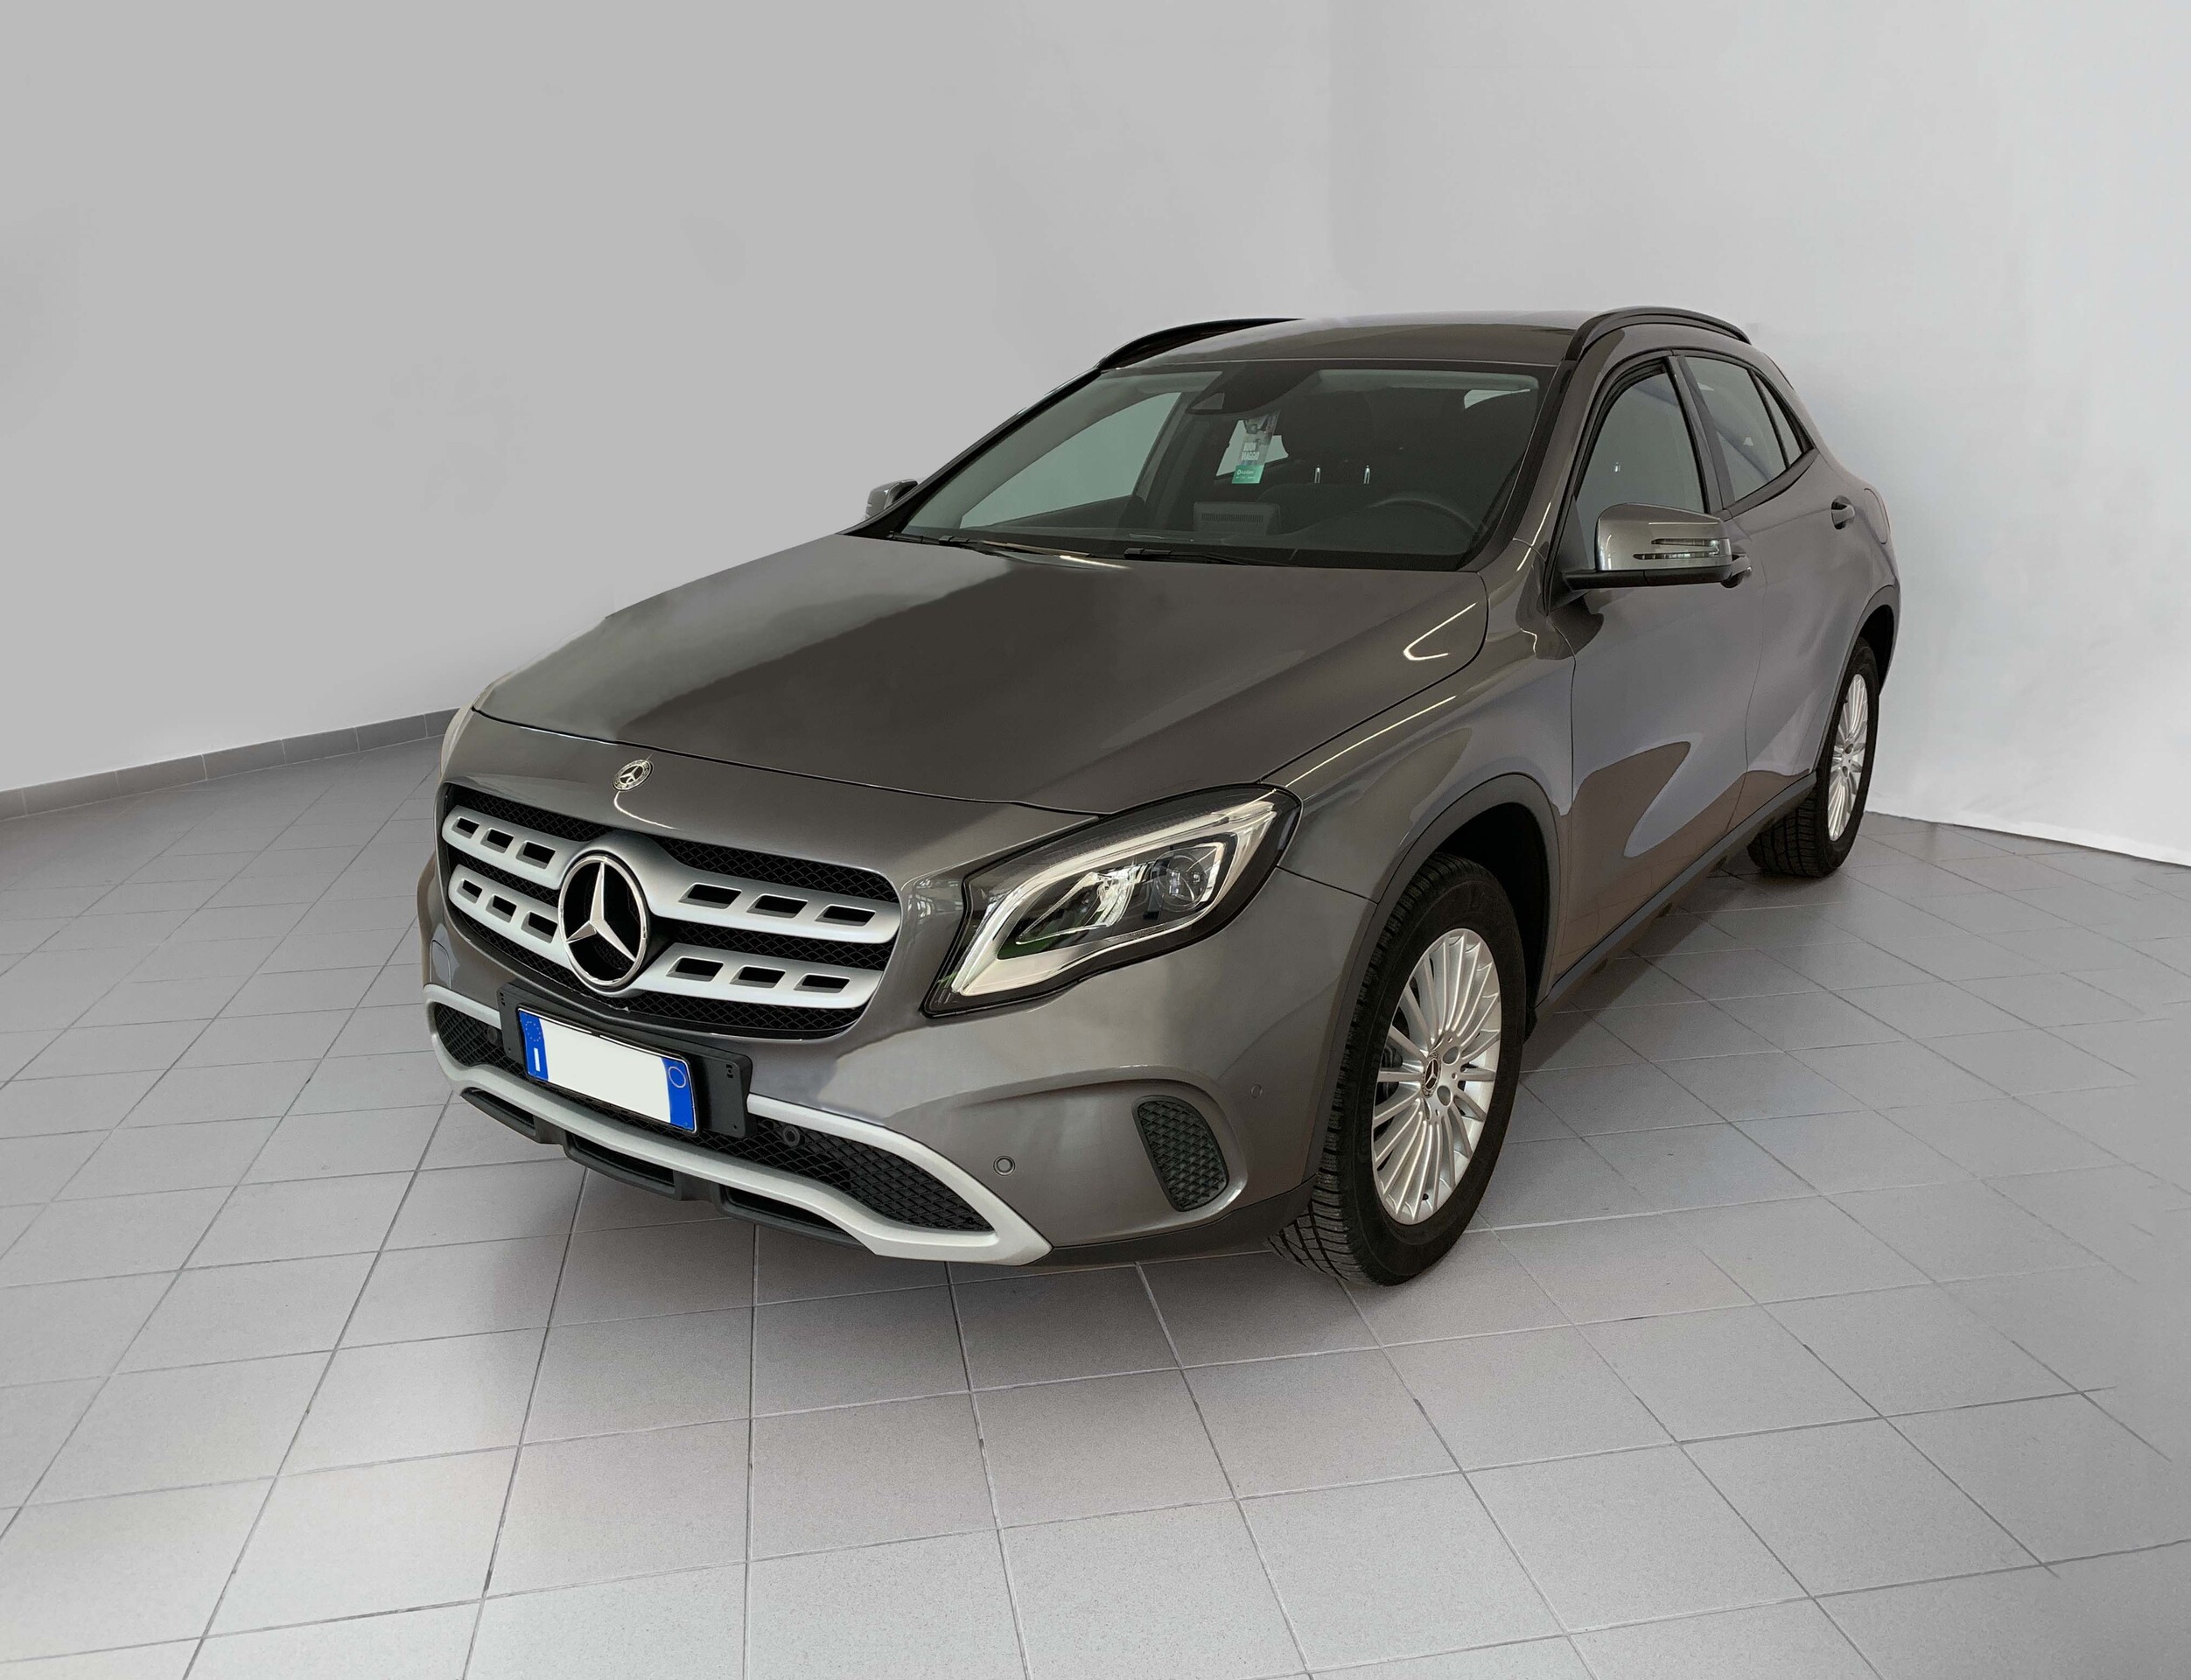 MERCEDES GLA CROSSOVER 200 D AUTOMATIC BUS. EXTRA 001 usata